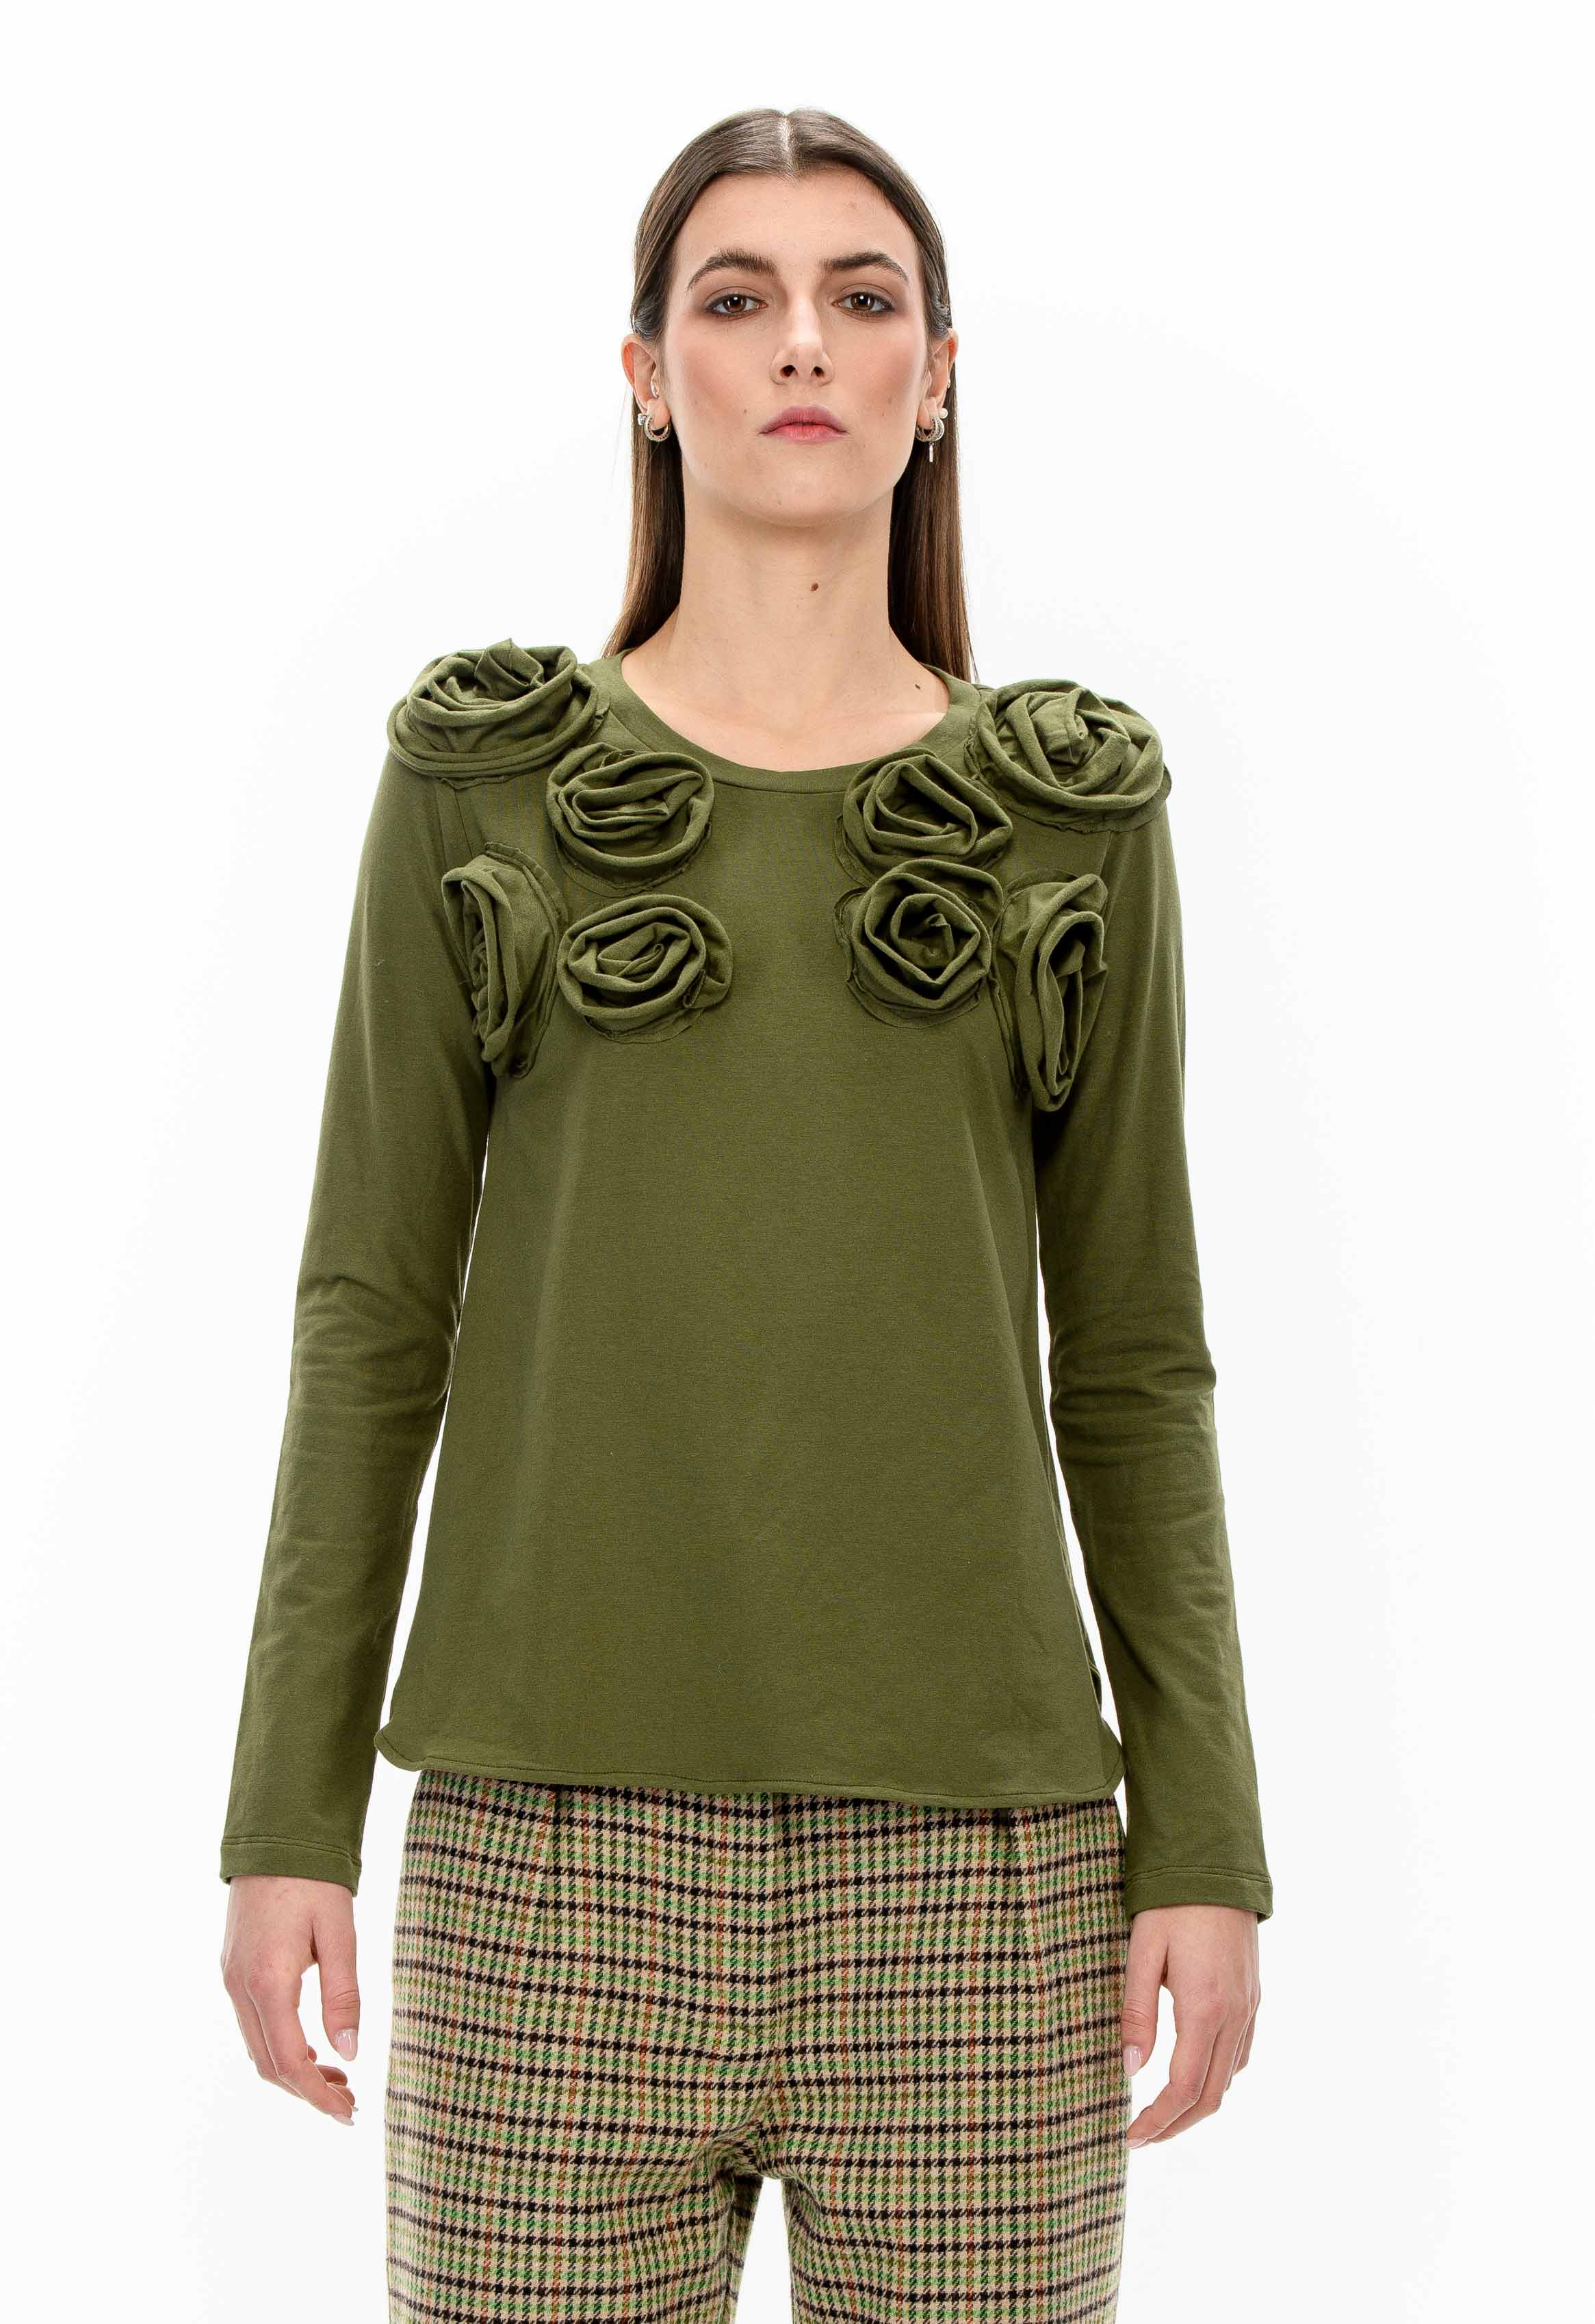 GERTRUDE Sweater with roses